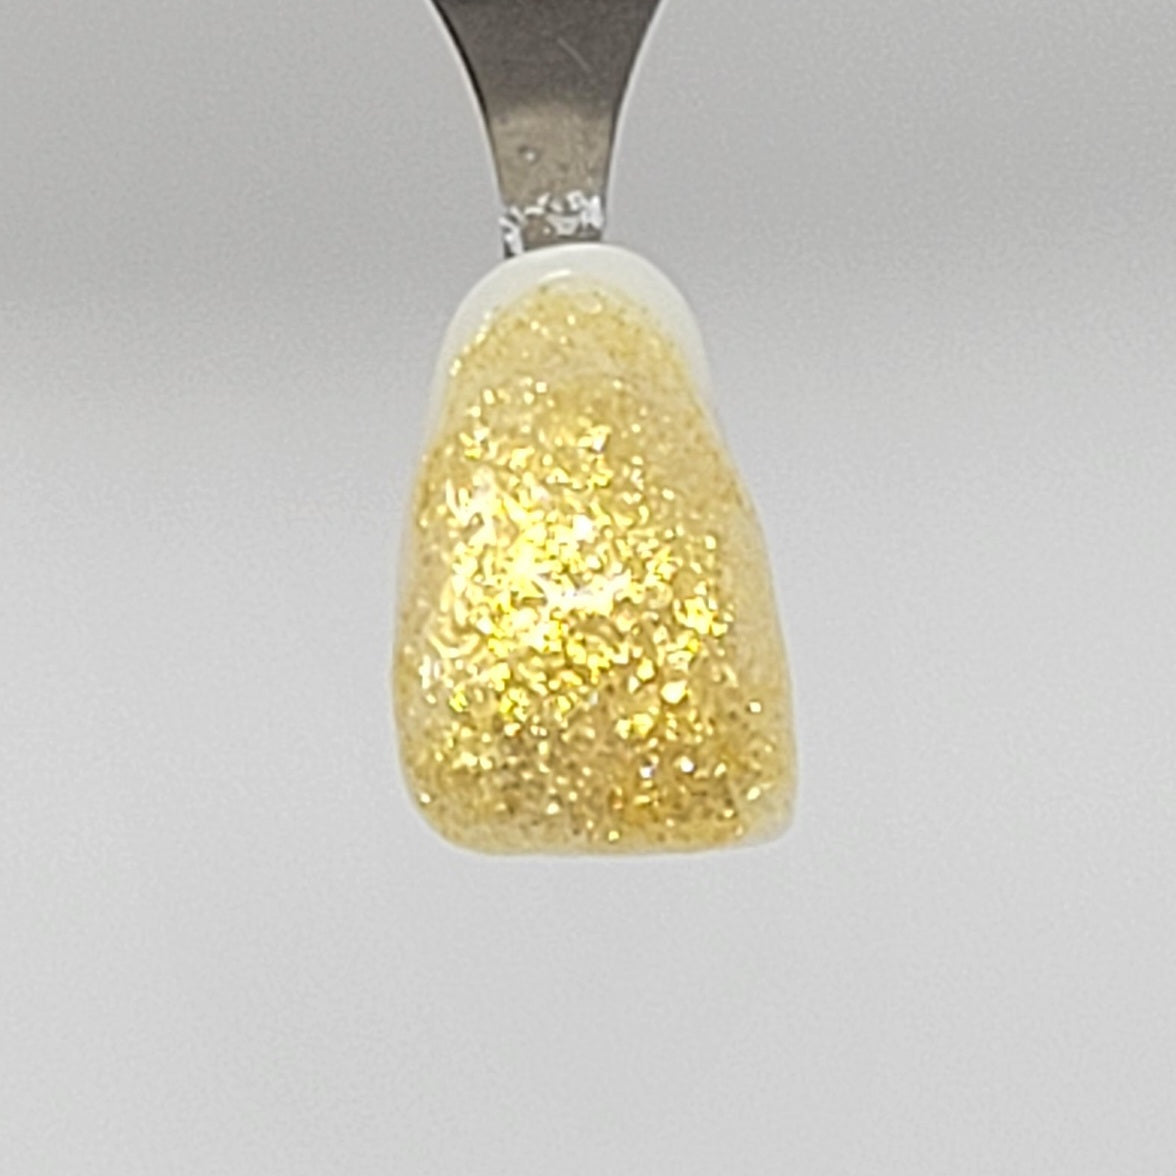 Gold Sparkle Temporary Tattooth Colorant on a demo tooth.  These colorants can be applied to teeth to temporarily alter their color or iridescence.